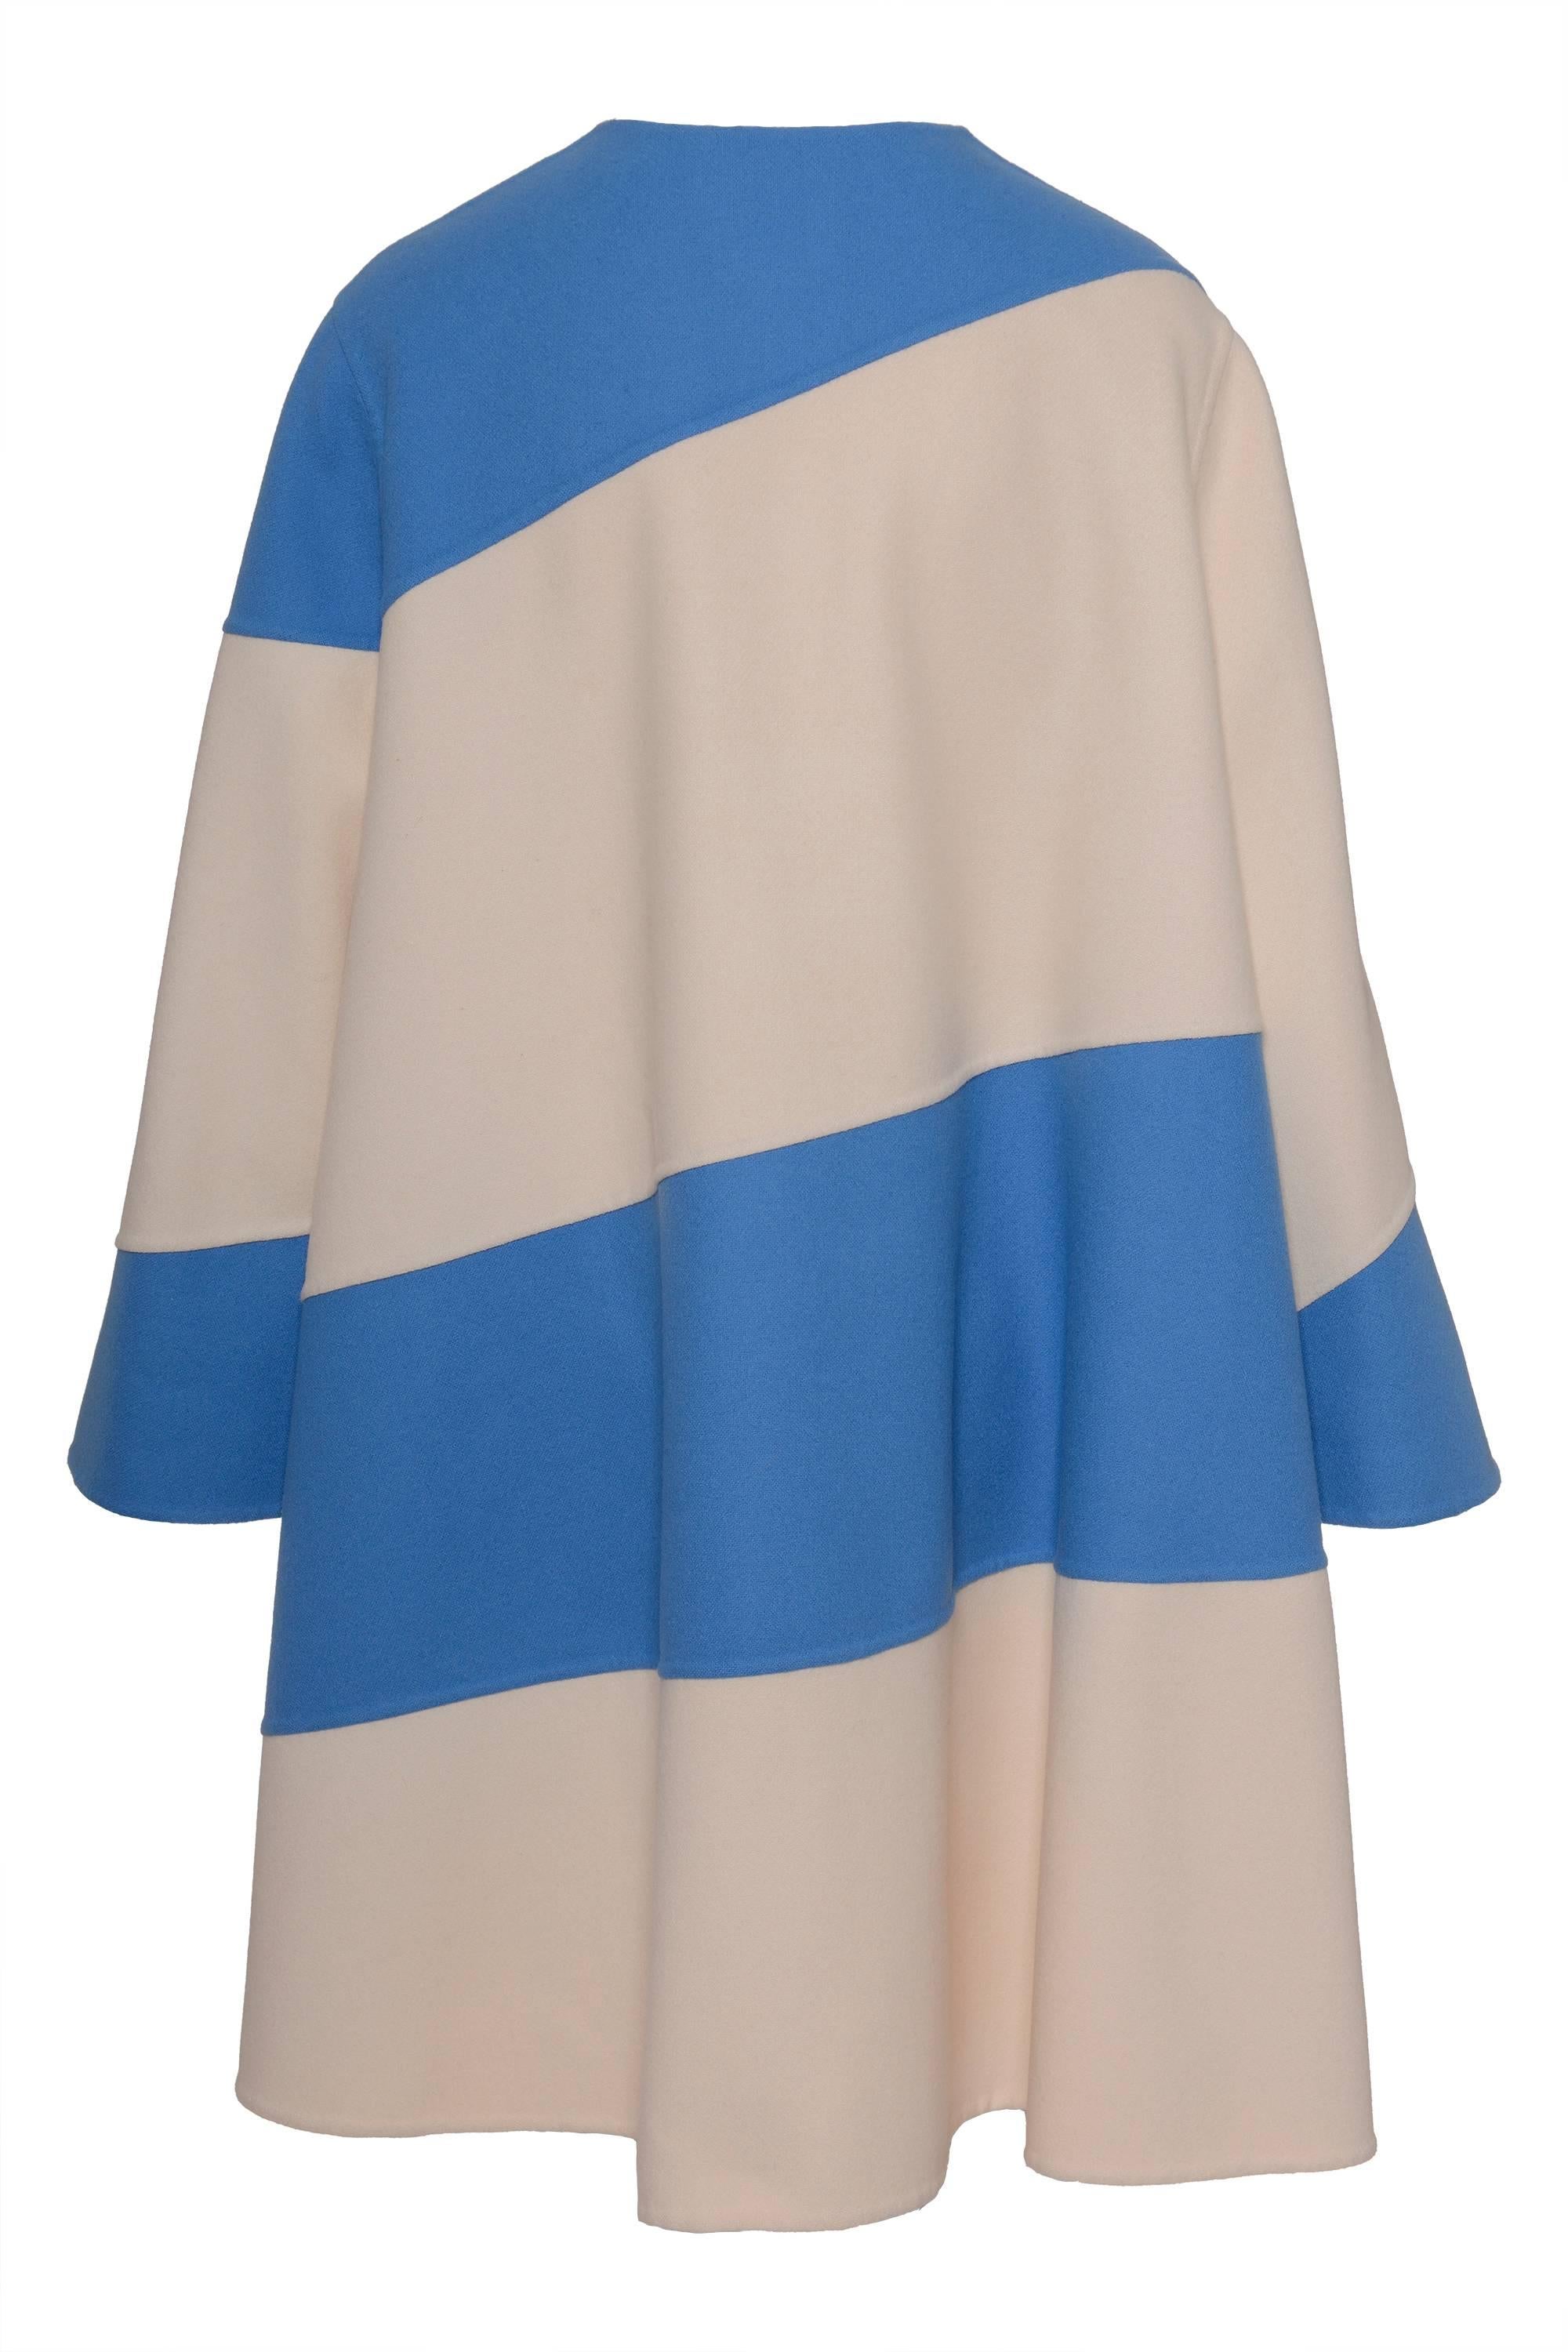 This lovely White and sky blue patchwork tent coat by LAURA BIAGIOTTI has a lined button closure, angel sleeves, pad shoulders. It is a piece of a special futurist collection inspired by the artist Giacomo Balla, in addition this item has been